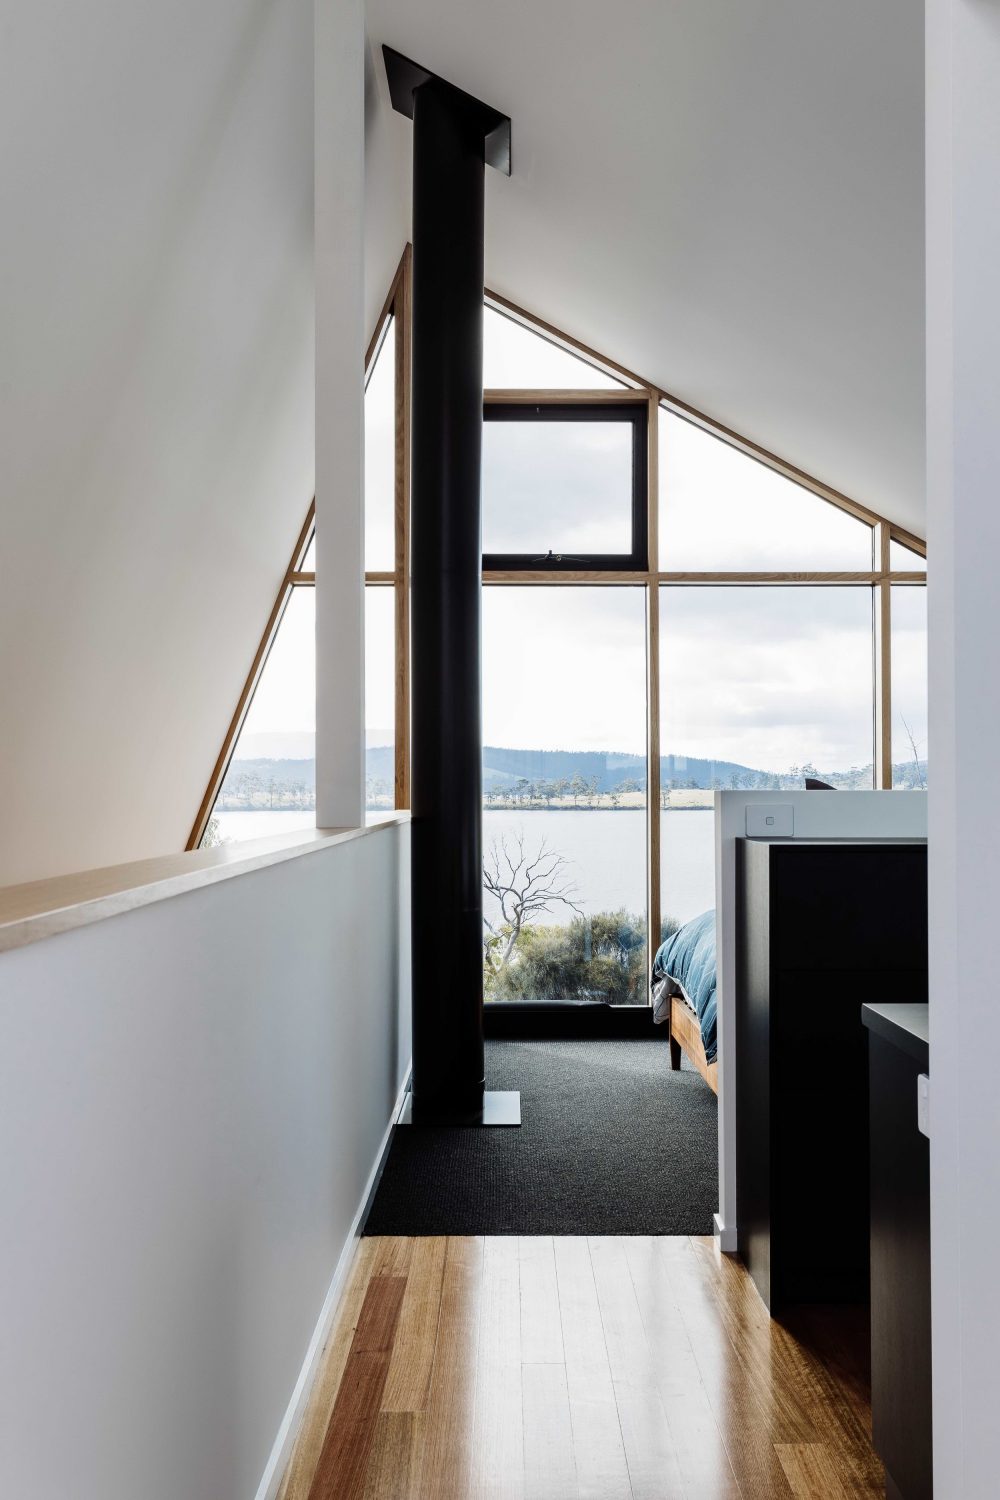 Apollo Bay House by Dock4 Architects